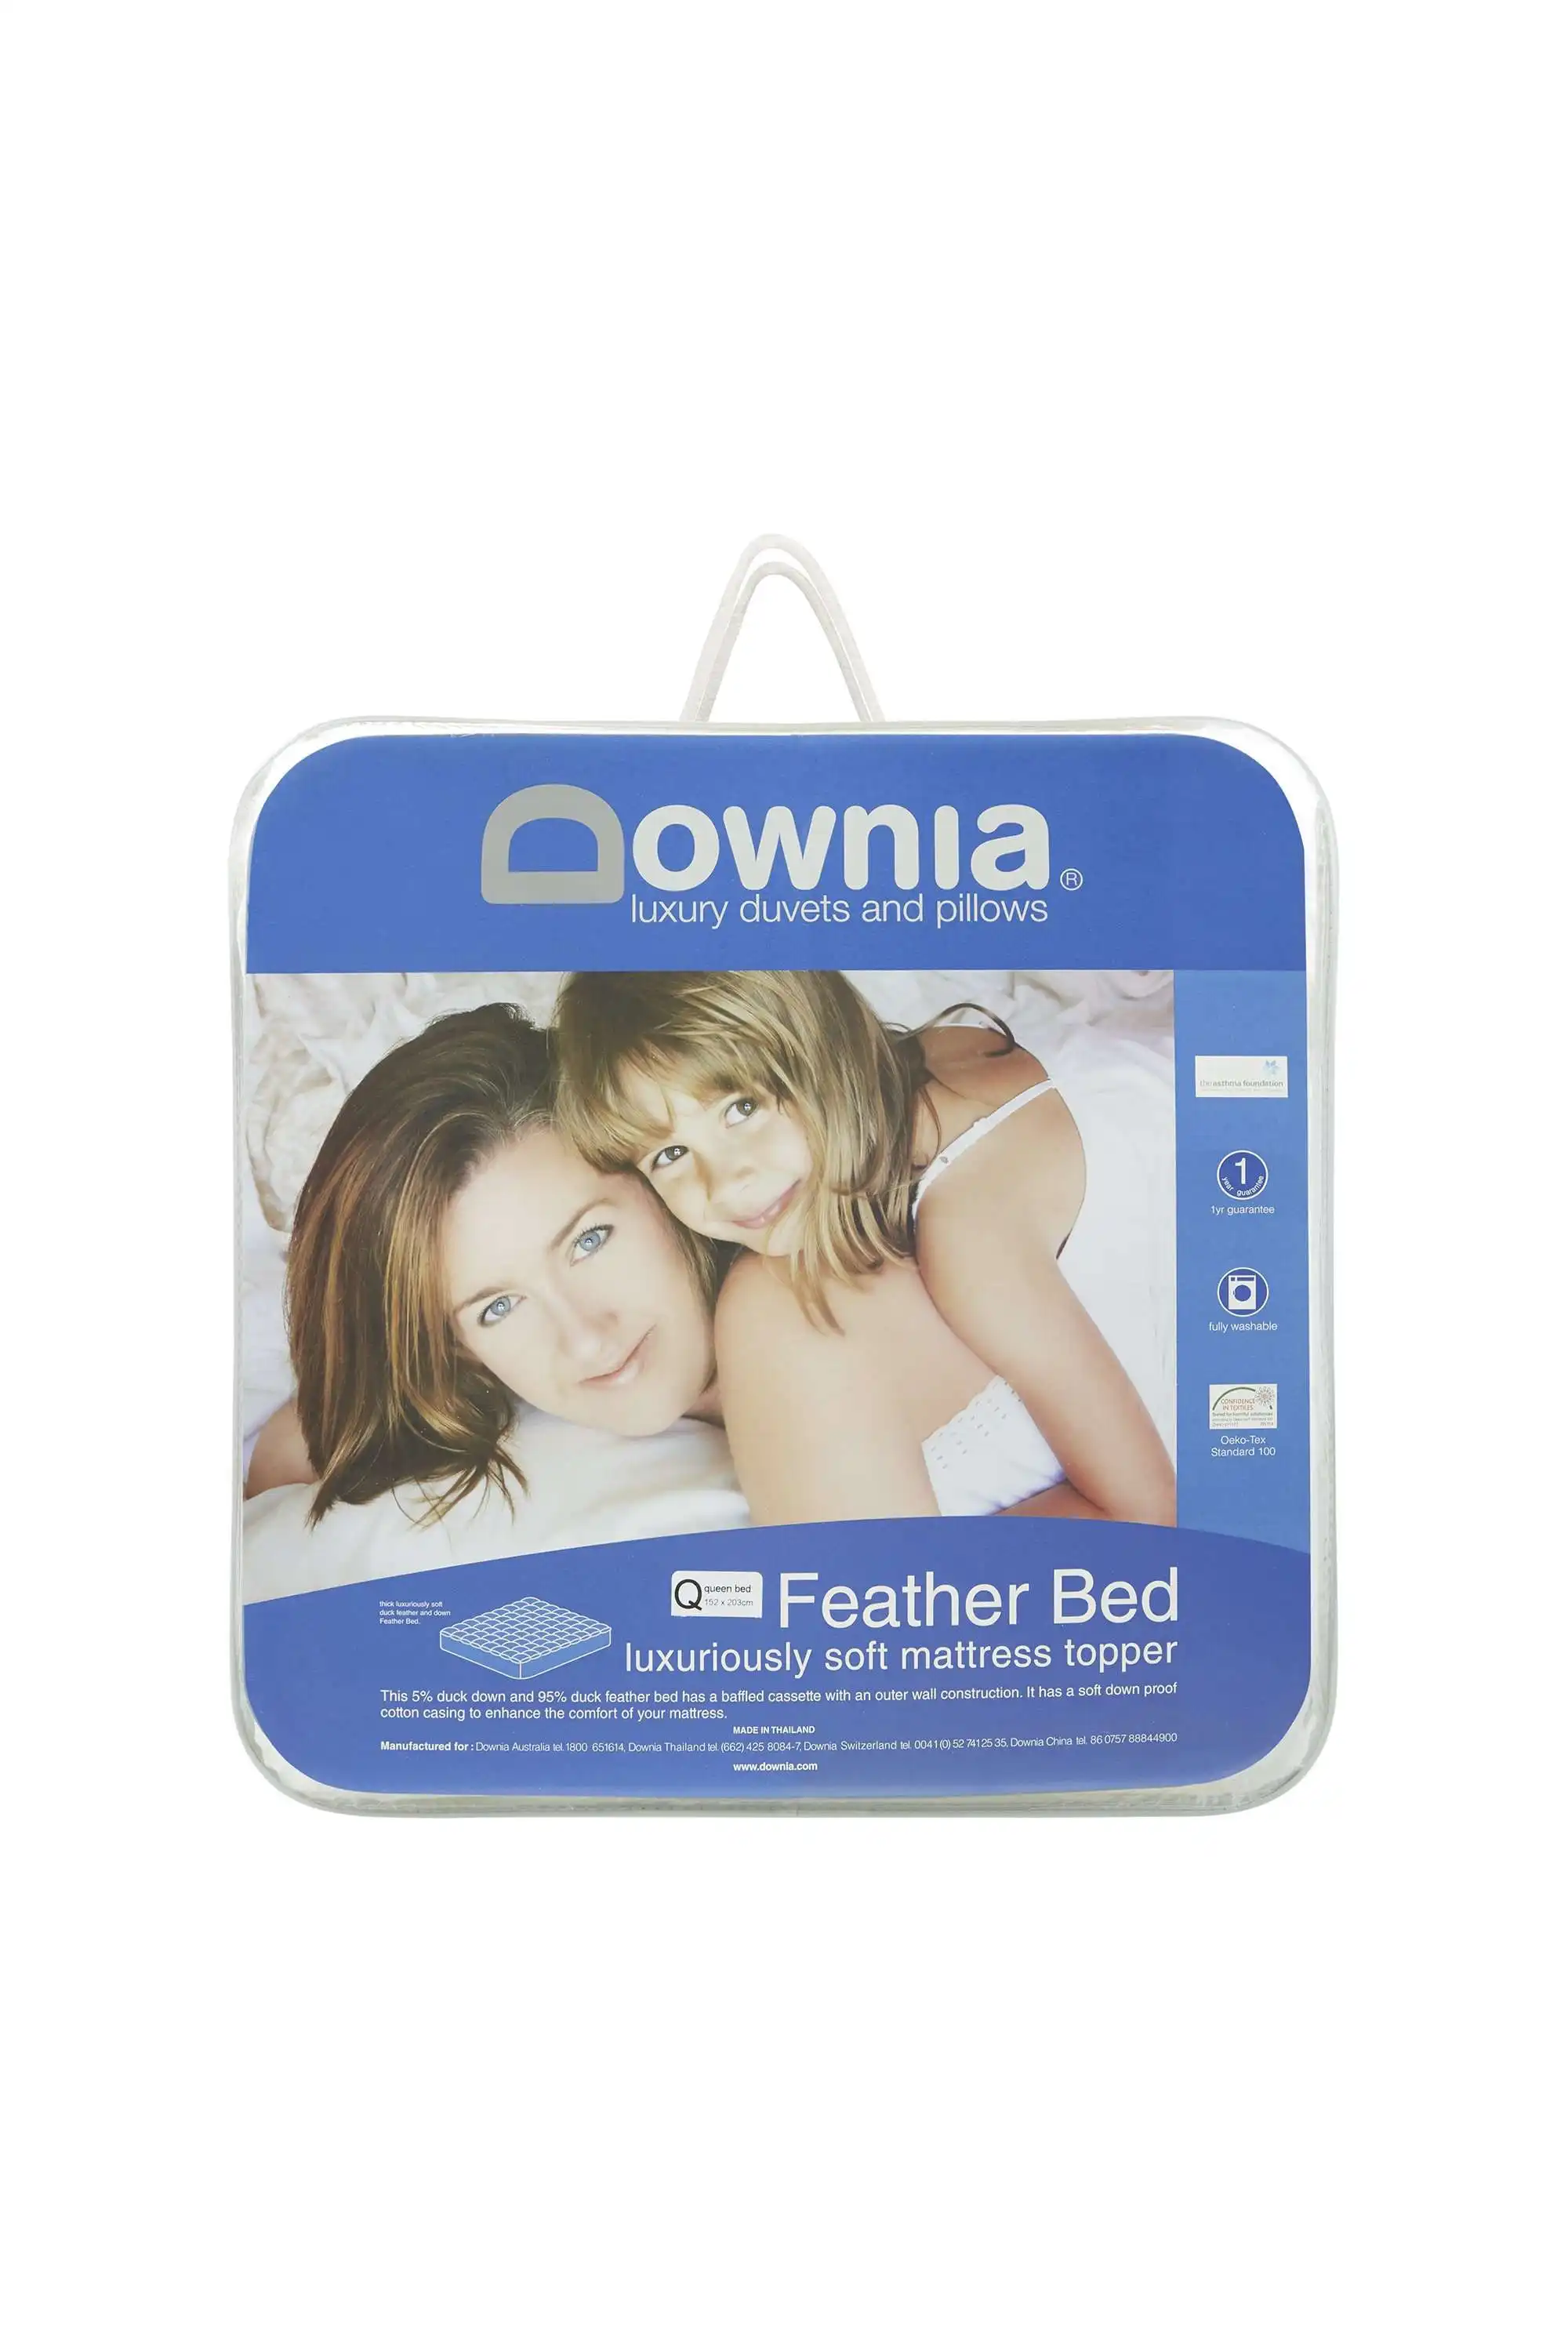 Downia Feather Bed Duck Down Mattress Topper